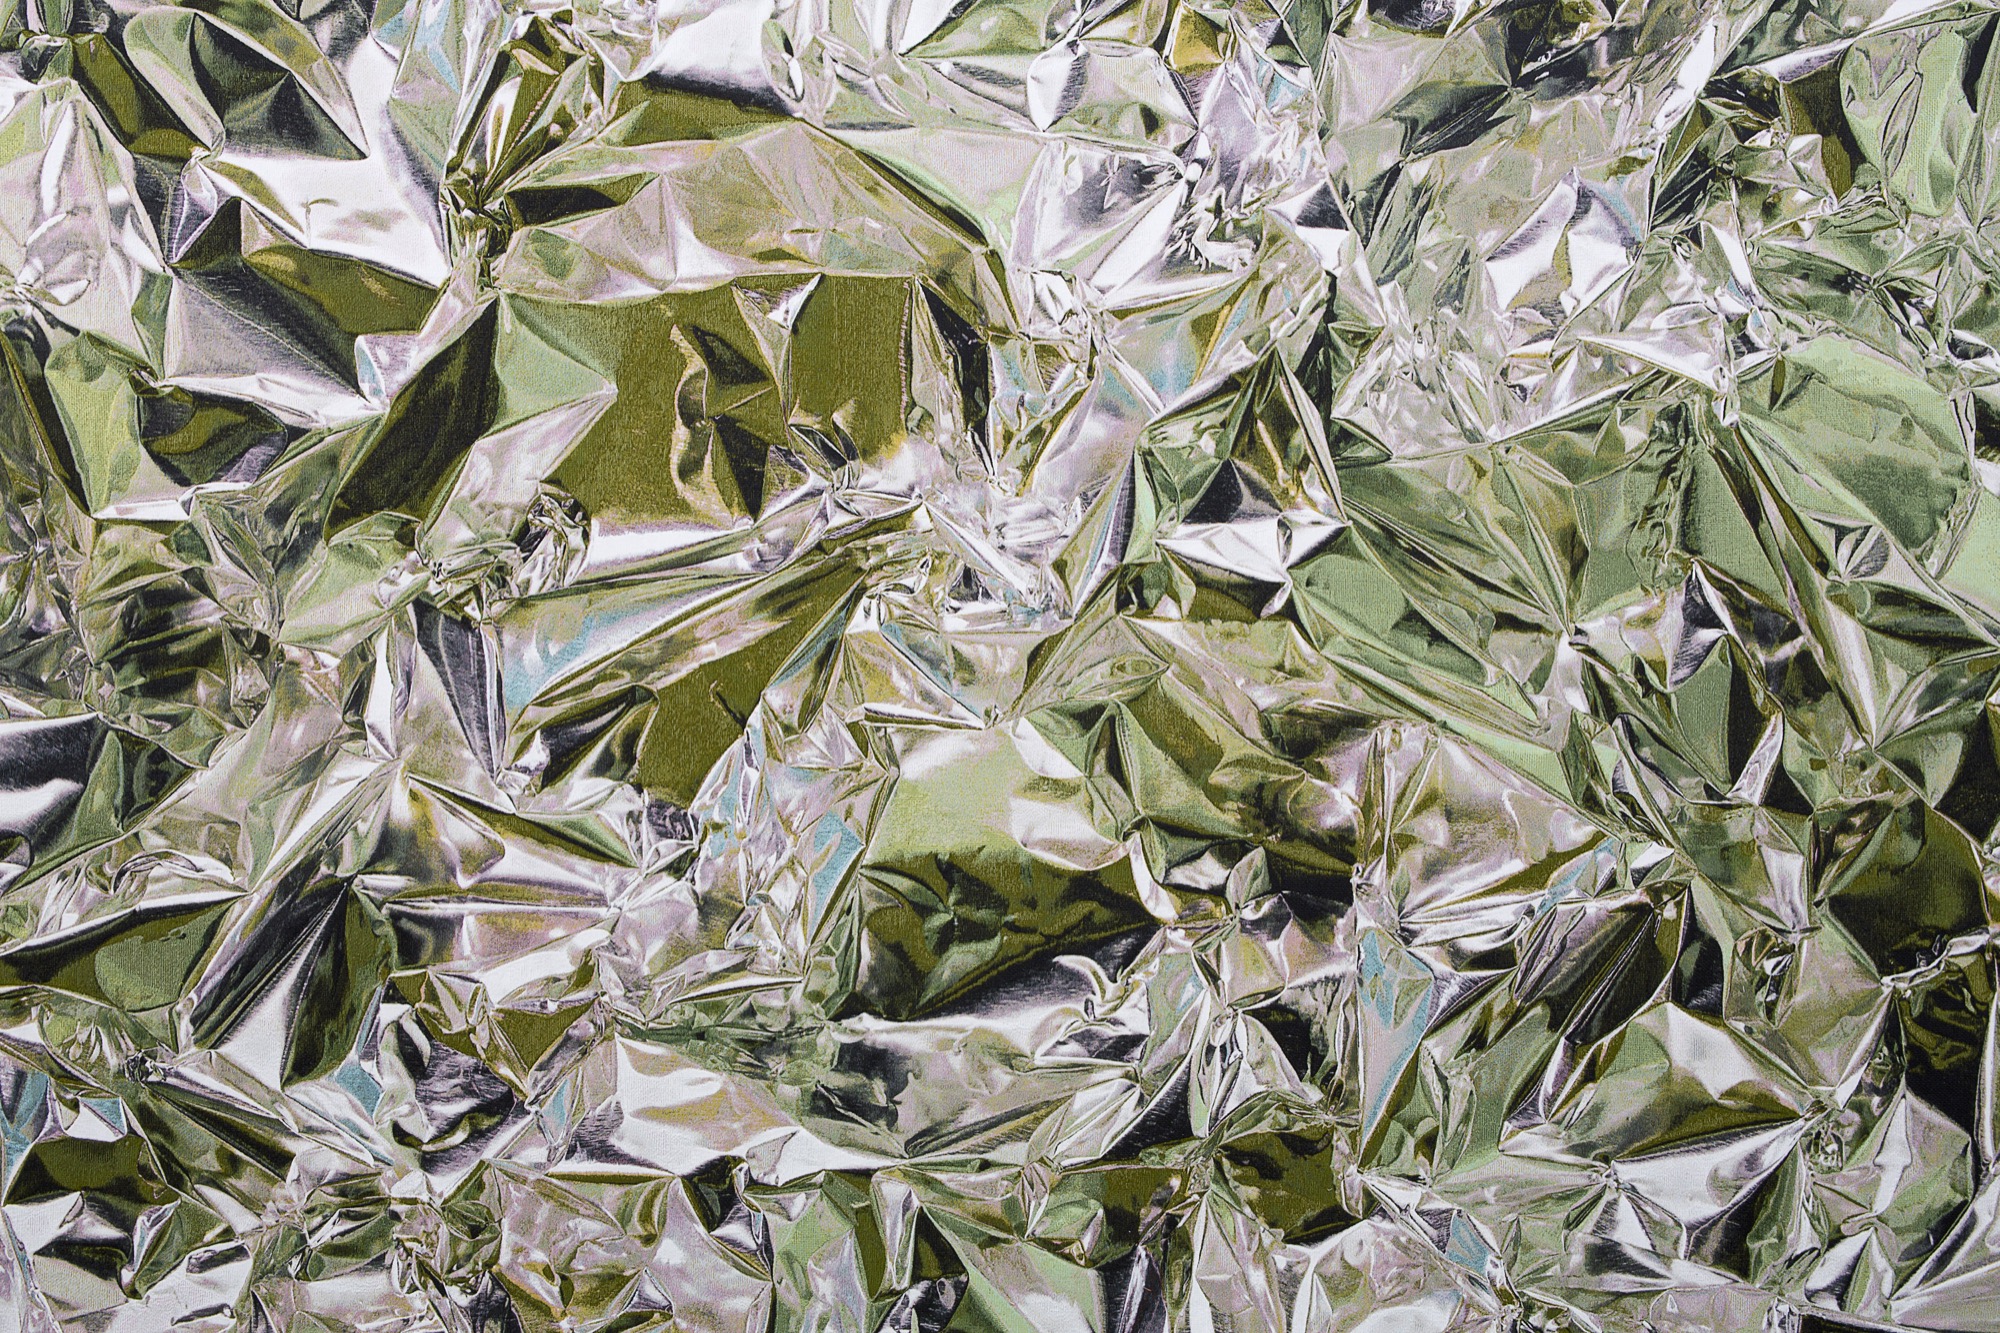 Pae White, <em>Spearmint to Peppermint</em> (2013), cotton, polyester. National Gallery of Victoria, Melbourne. Purchased NGV Foundation with the assistance of Donald Russell Elford and Dorothy Grace Elford Bequest, 2017. © Pae White. Image courtesy Pae White and 1301PE, Los Angeles.